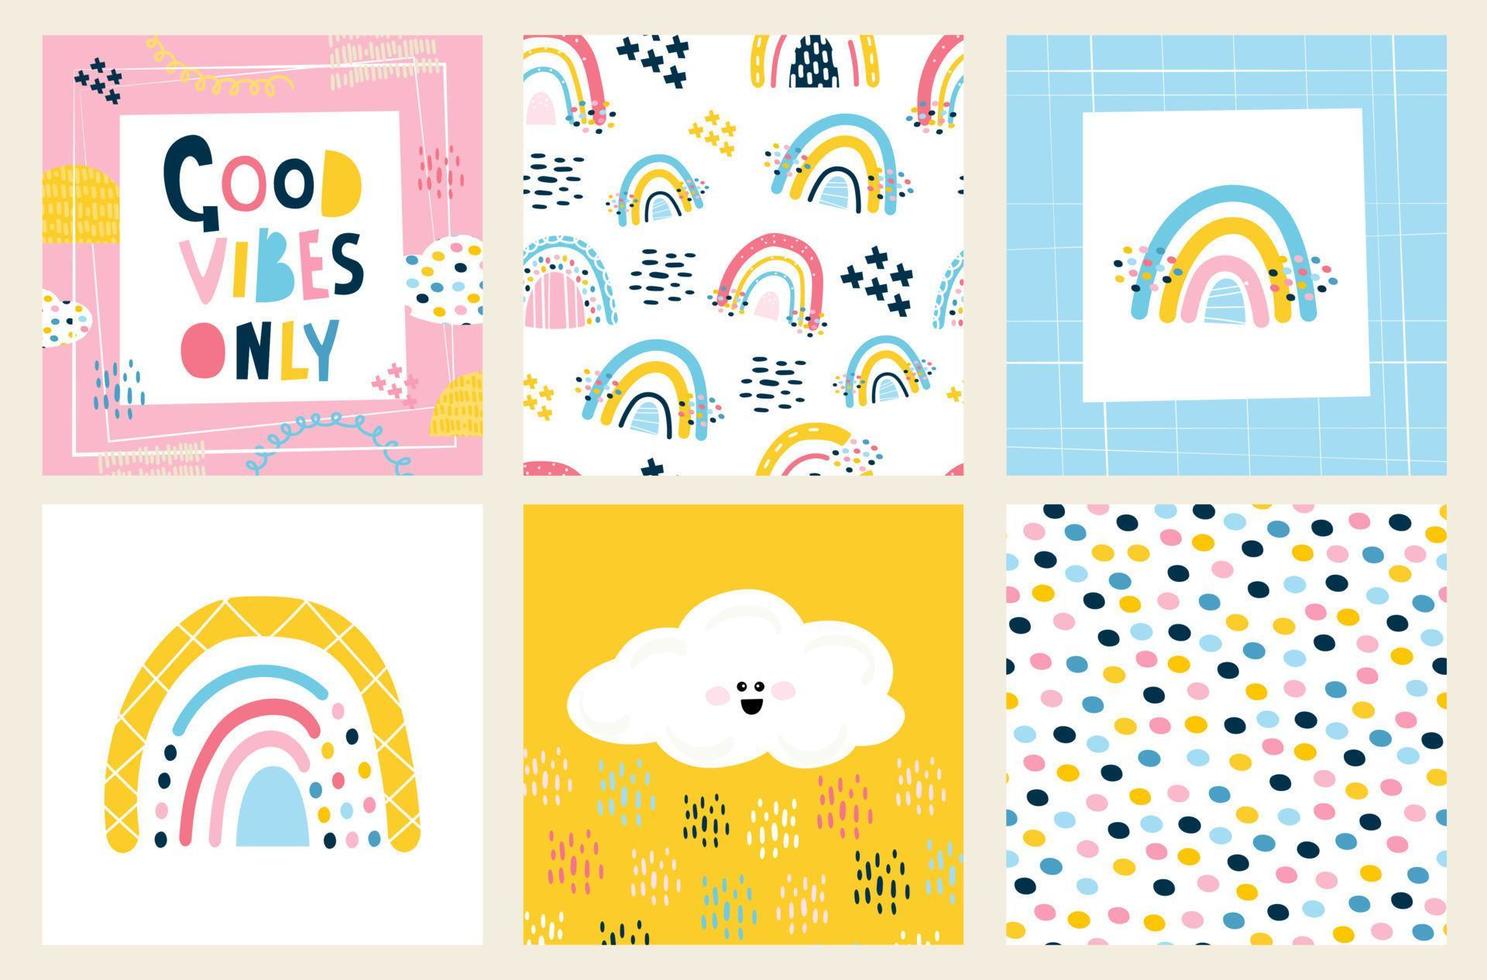 Scandinavian style rainbow. Set for decorating a children's room, birthday, printing on fabric. 2 seamless patterns, 2 isolated elements, print lettering, character. Vector illustration, hand-drawn